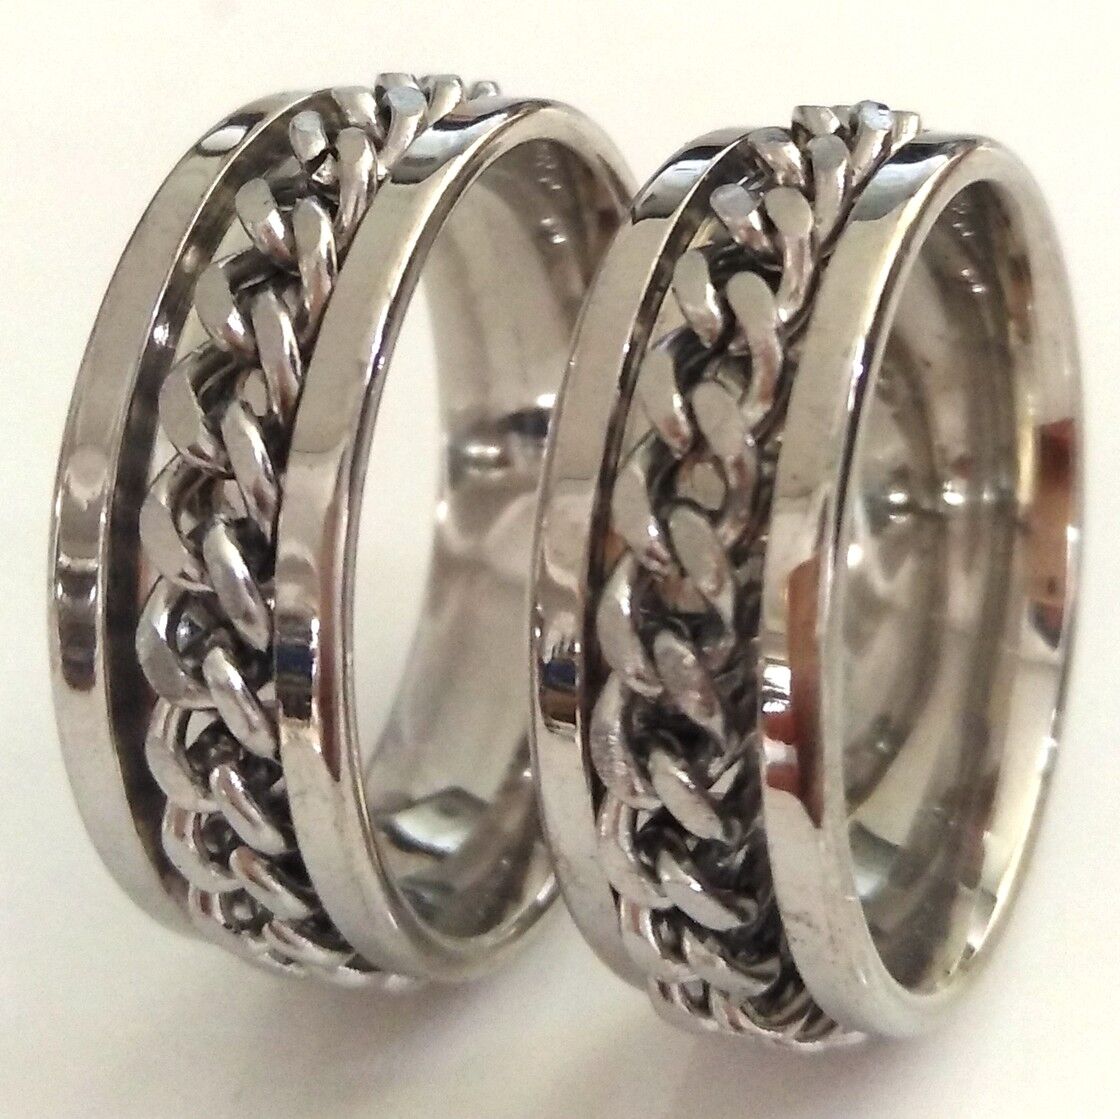 Wholesale 50 Silver SPINNER Chain Men's Cool Punk Hot 316L Stainless Steel Ring Unbranded